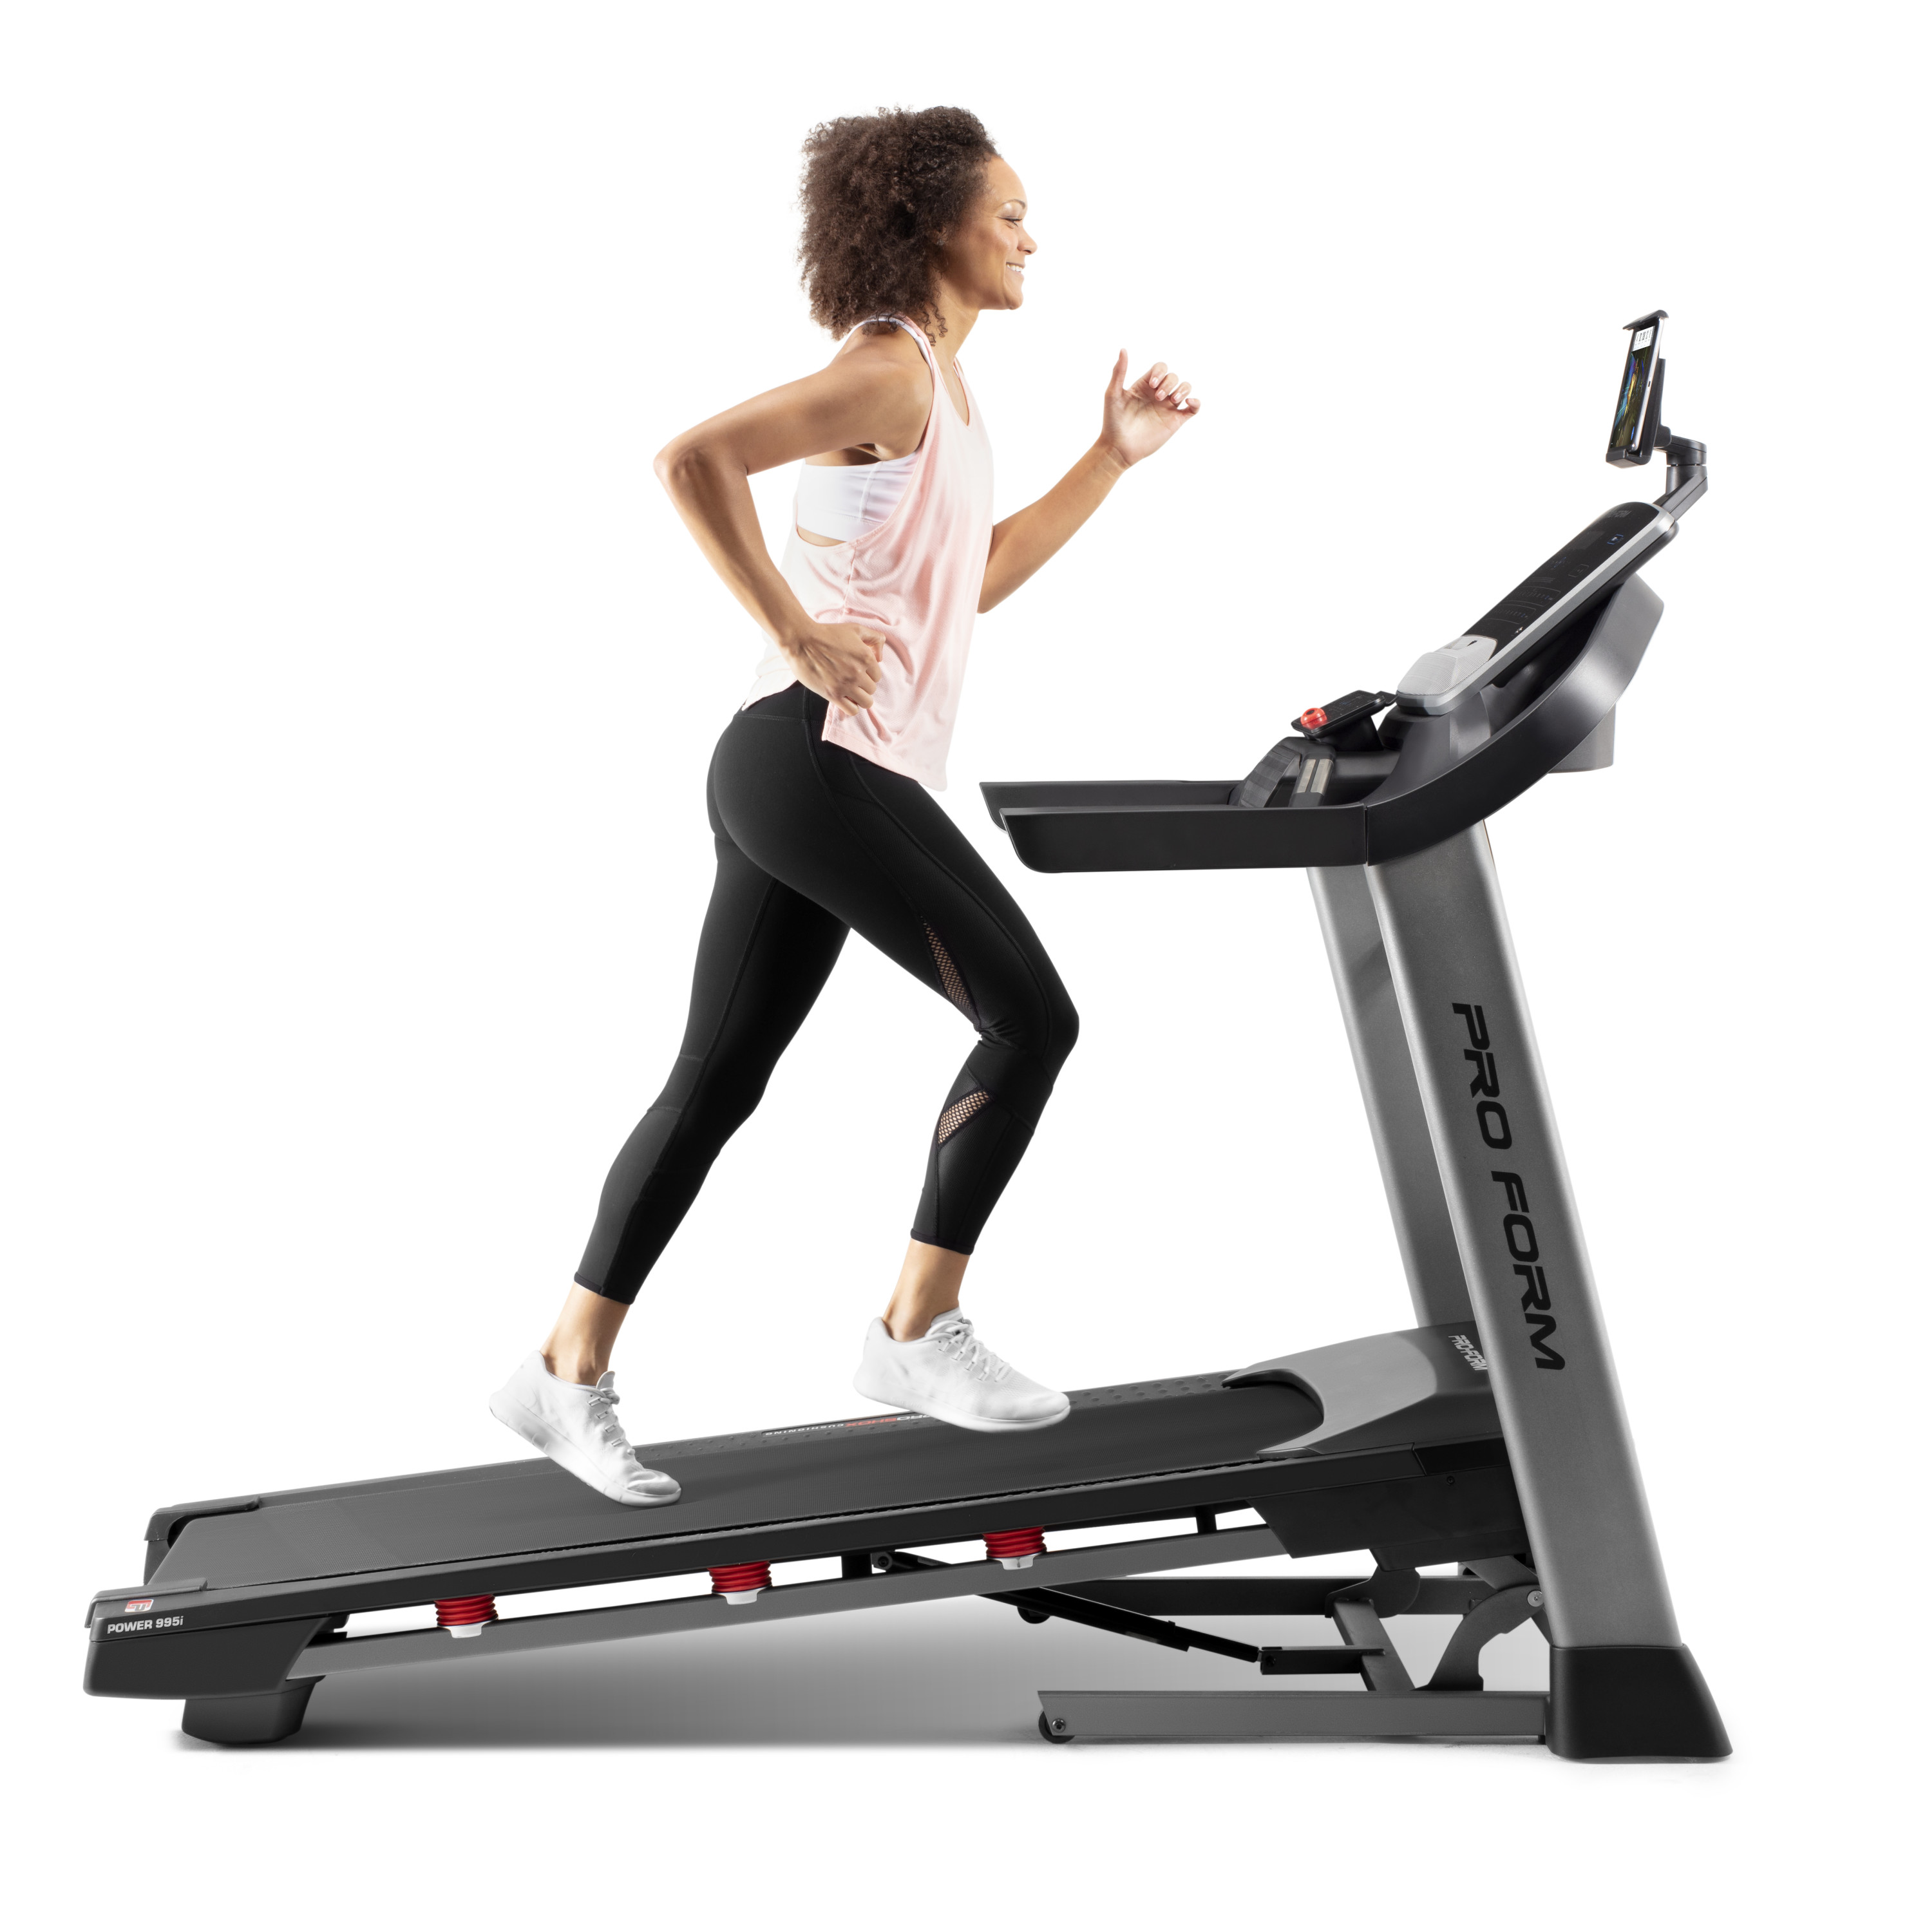 ProForm SMART Power 995i Treadmill, iFIT Coach Compatible - image 5 of 17